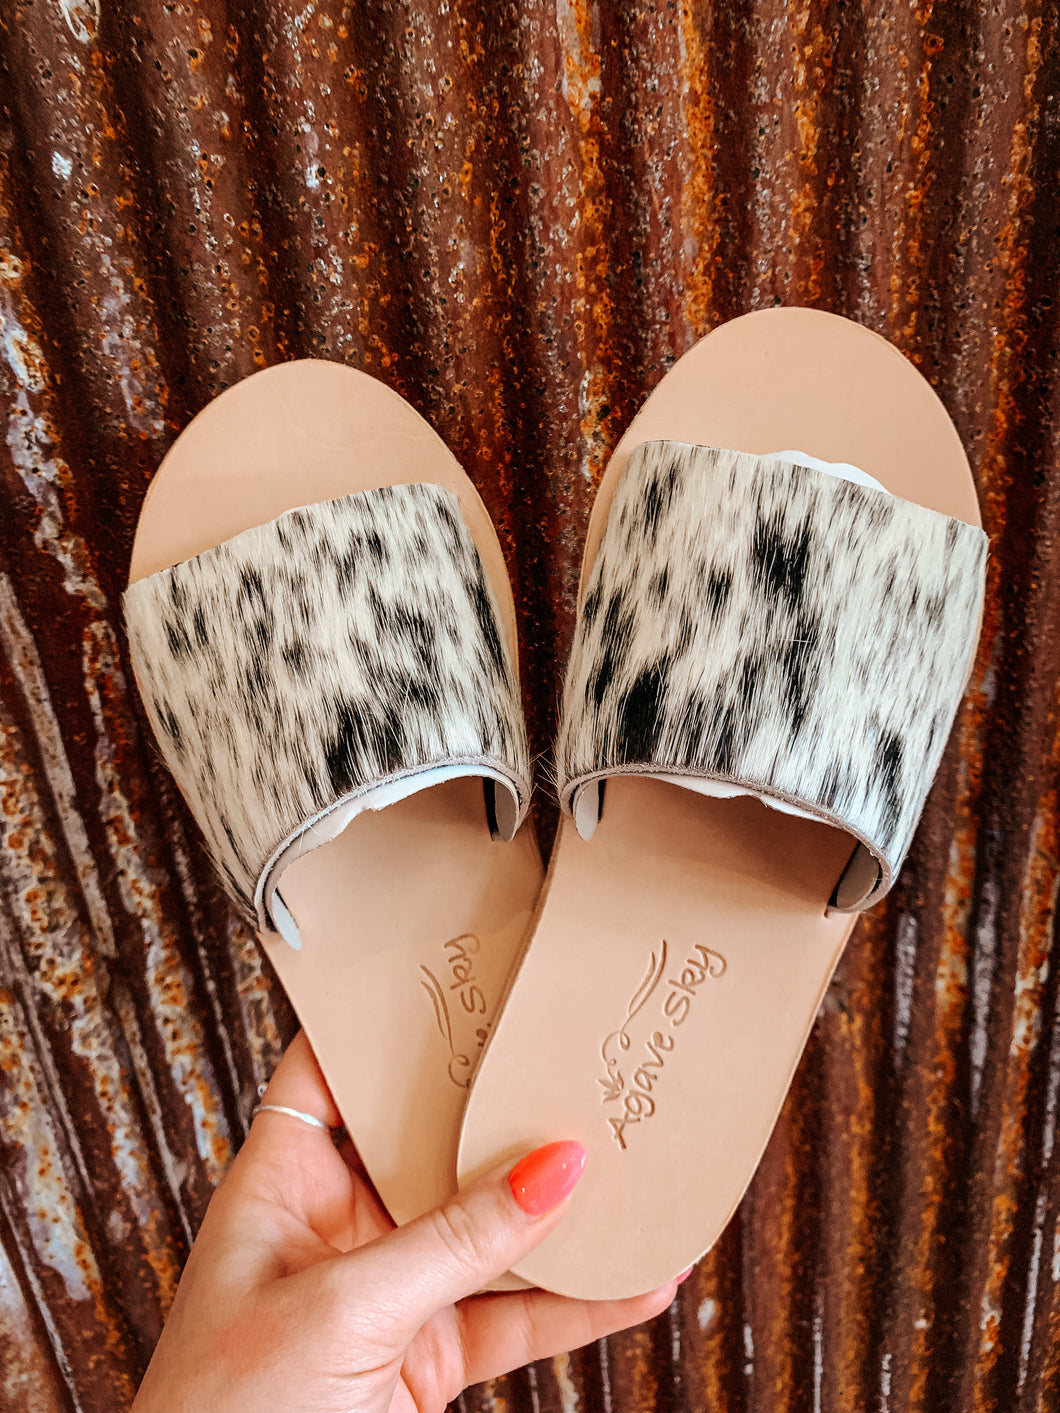 The Yuma Cowhide Sandals in Salt and Pepper